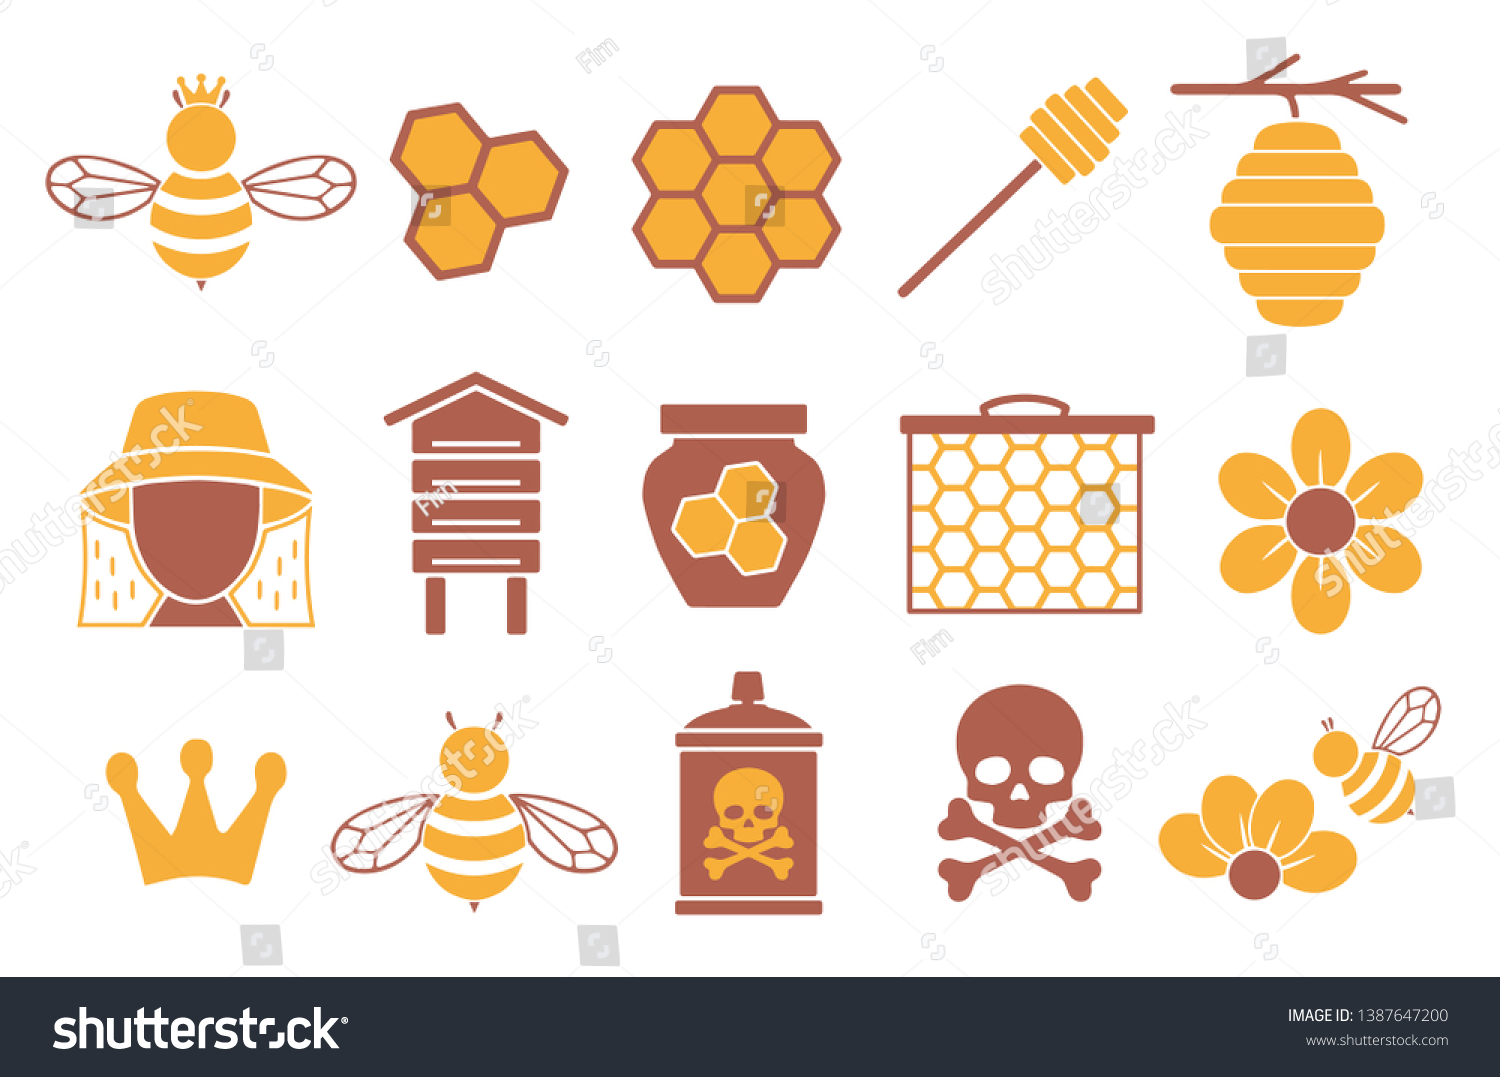 SVG of Vector icons set for creating infographics related to bees, pollination and beekeeping like honey jar, flower and honeycomb svg